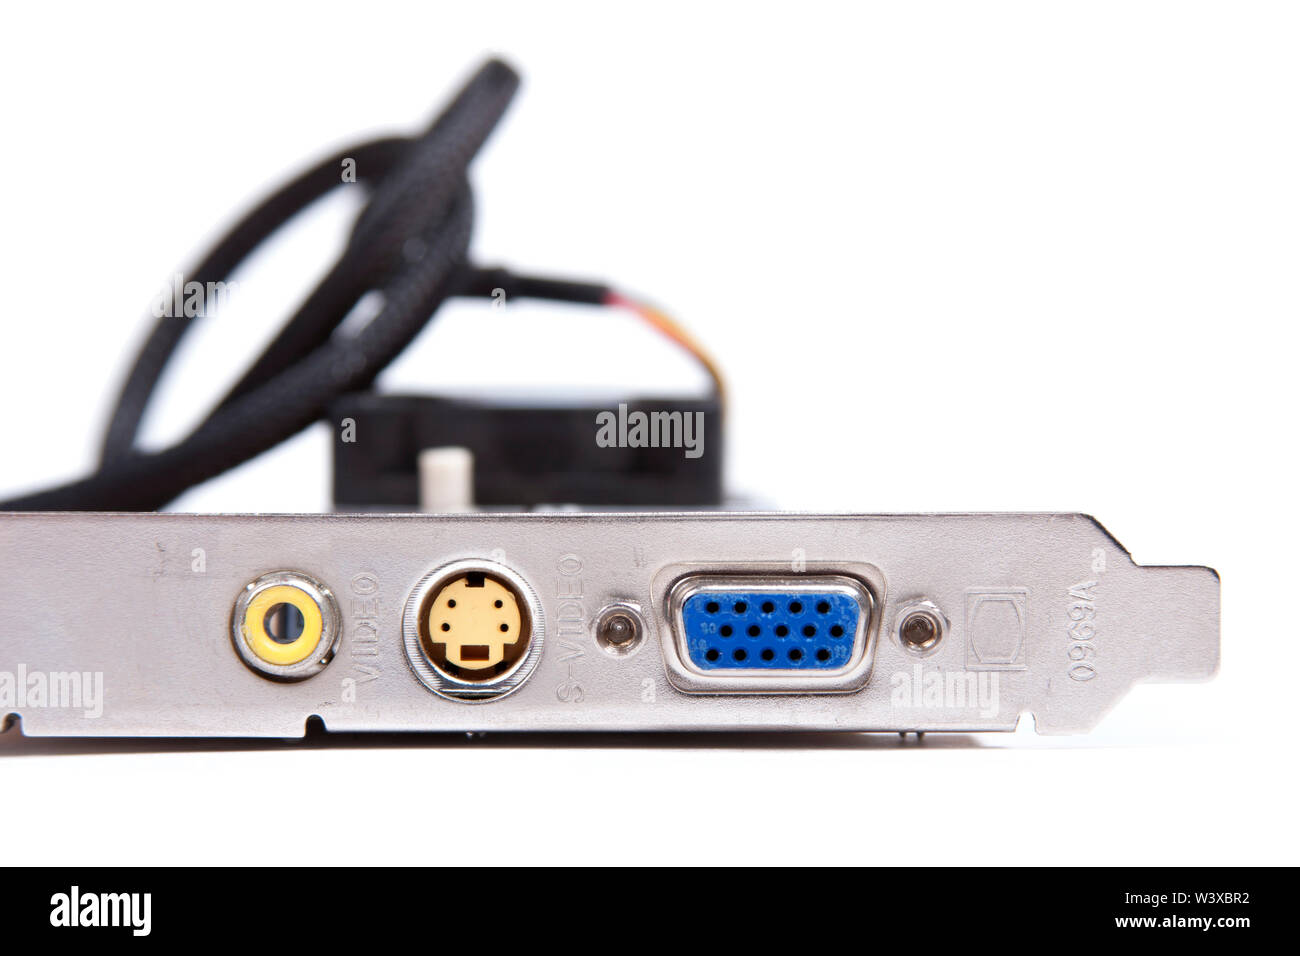 An old obsolete VGA / s-video output graphic card with archaic video outs  isolated on white background. Low end pc gaming, old tech and pc components  Stock Photo - Alamy